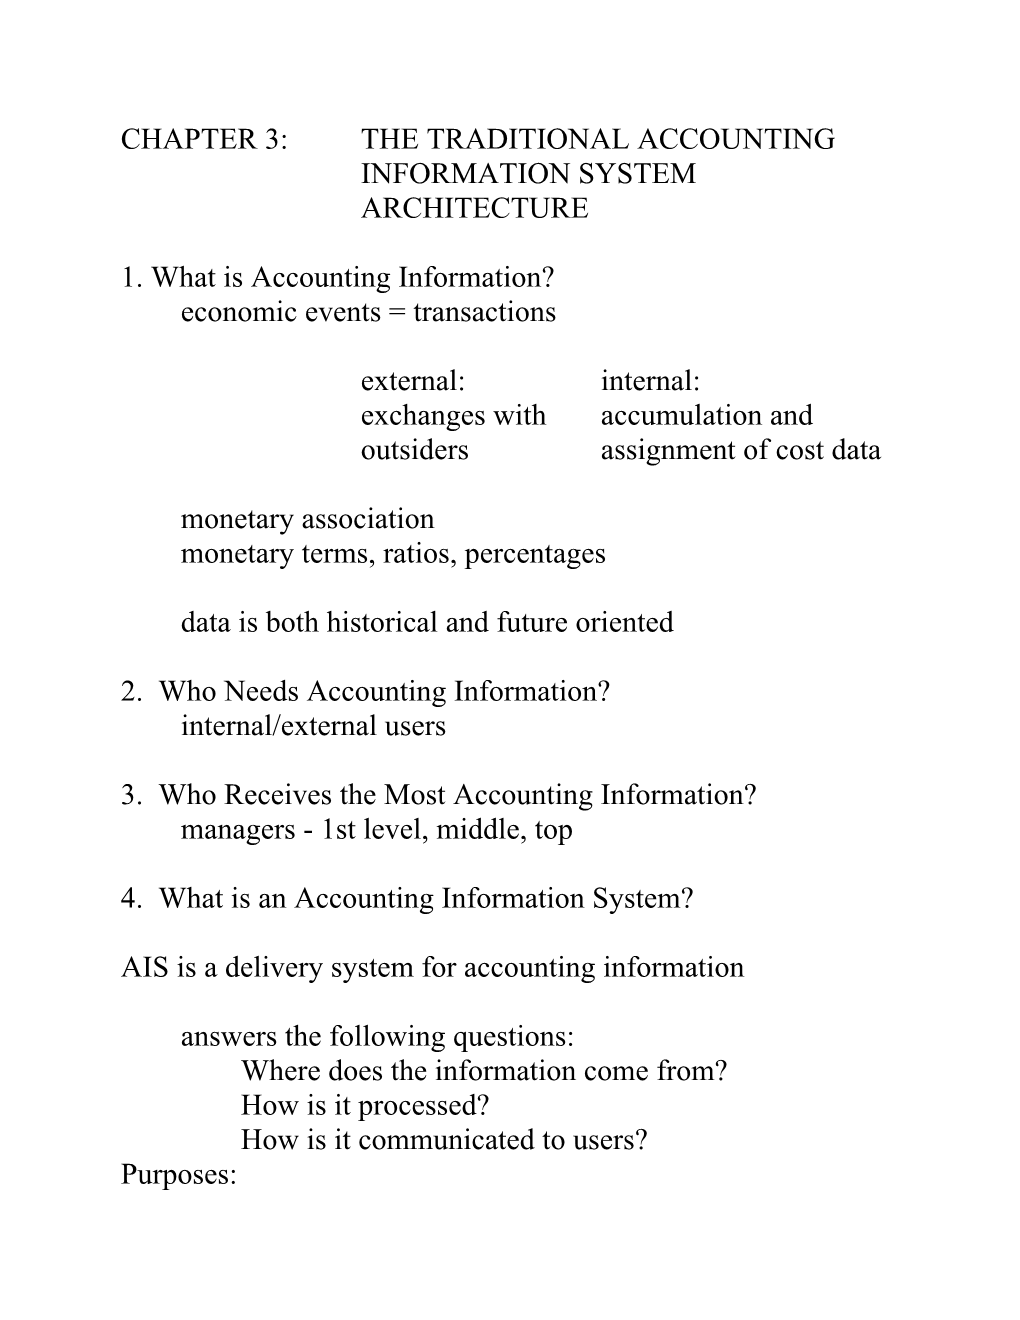 Chapter 3: the Traditional Accounting Information System Architecture